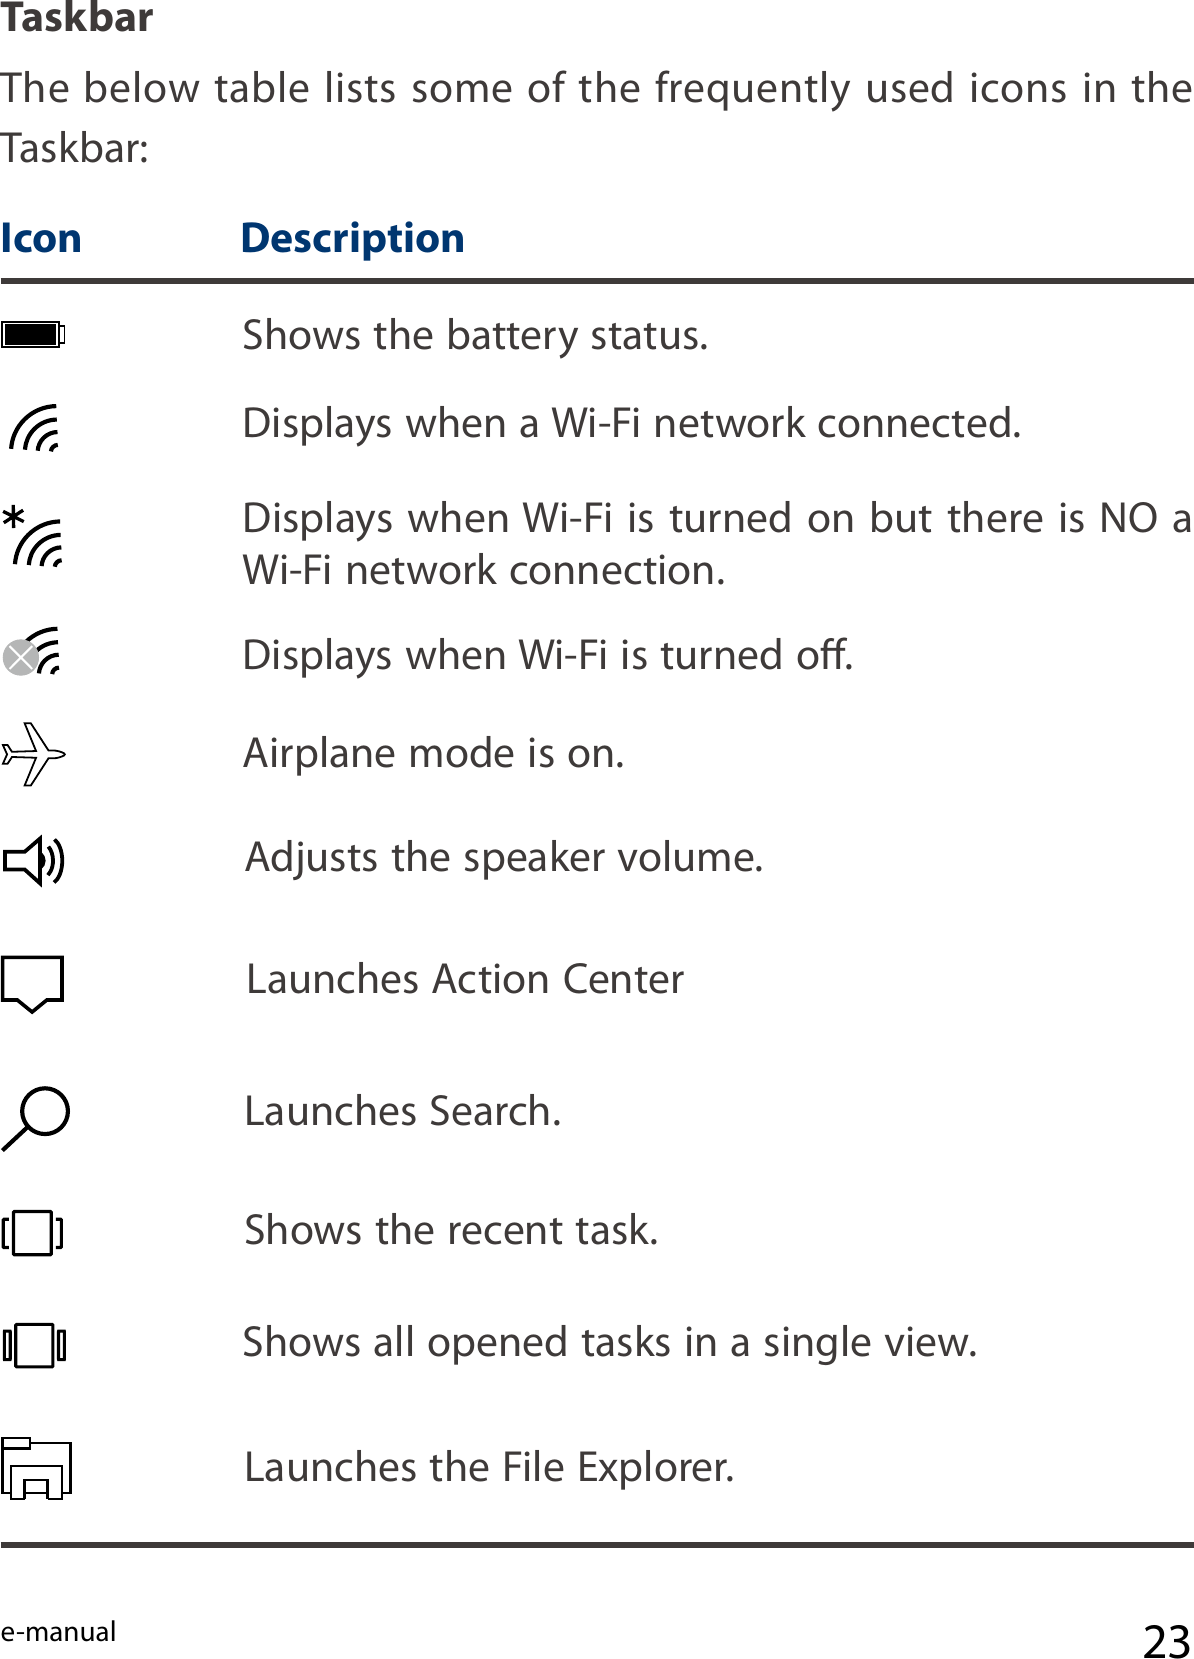 e-manual 23Taskbar The below table lists some of the frequently used icons in the Taskbar:Shows the battery status.Displays when Wi-Fi is turned on but there is NO a Wi-Fi network connection.Displays when a Wi-Fi network connected.Displays when Wi-Fi is turned o.Airplane mode is on. Adjusts the speaker volume. Shows the recent task. Launches Search. Shows all opened tasks in a single view. Launches the File Explorer.Launches Action Center Icon Description